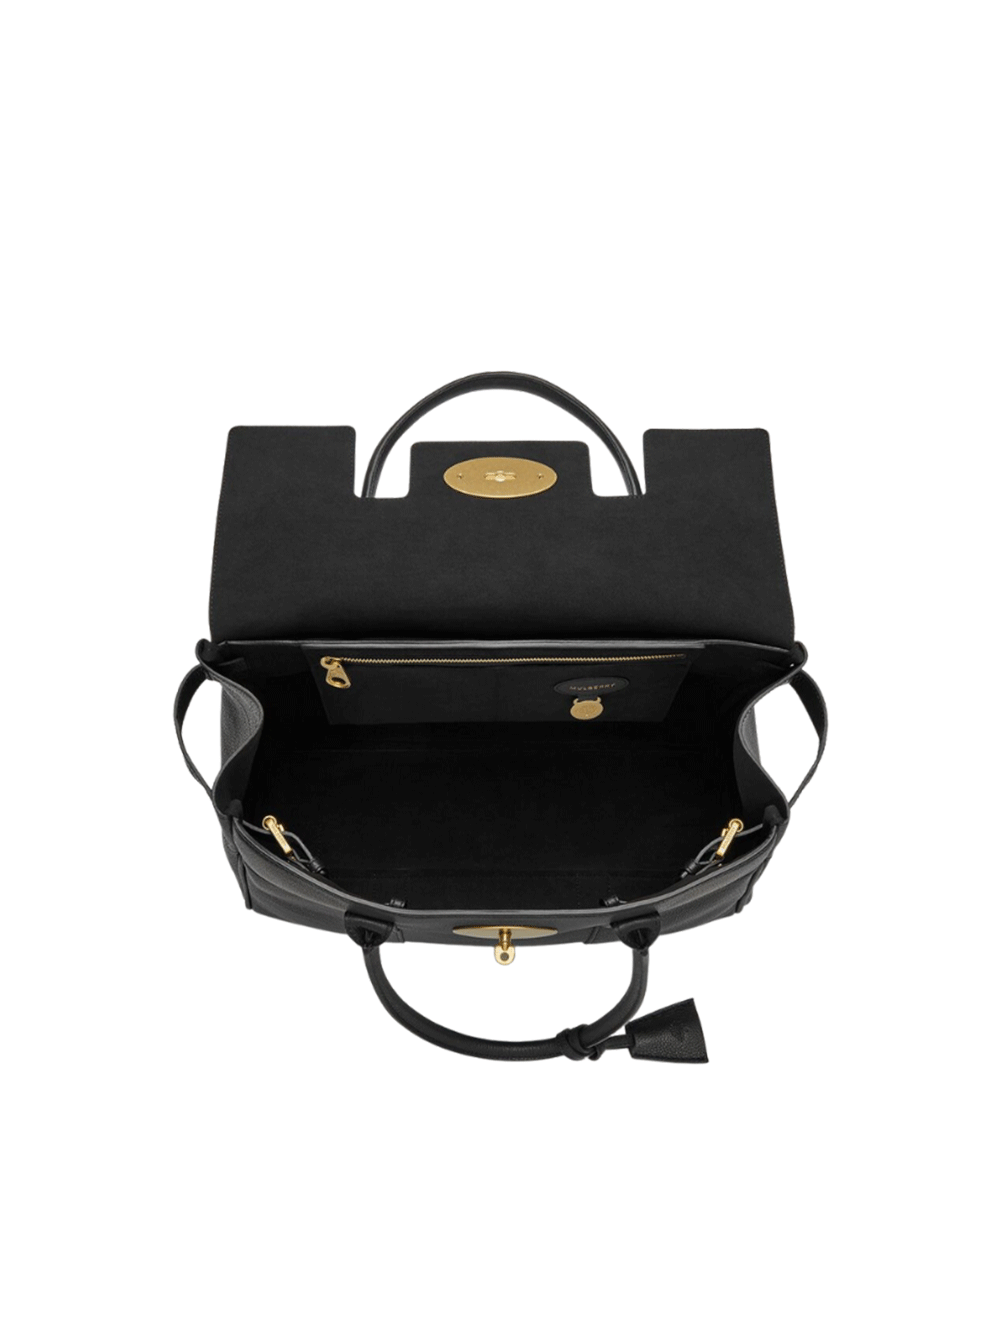 Mulberry-Bayswater-Small-Classic-Grain-Black-4